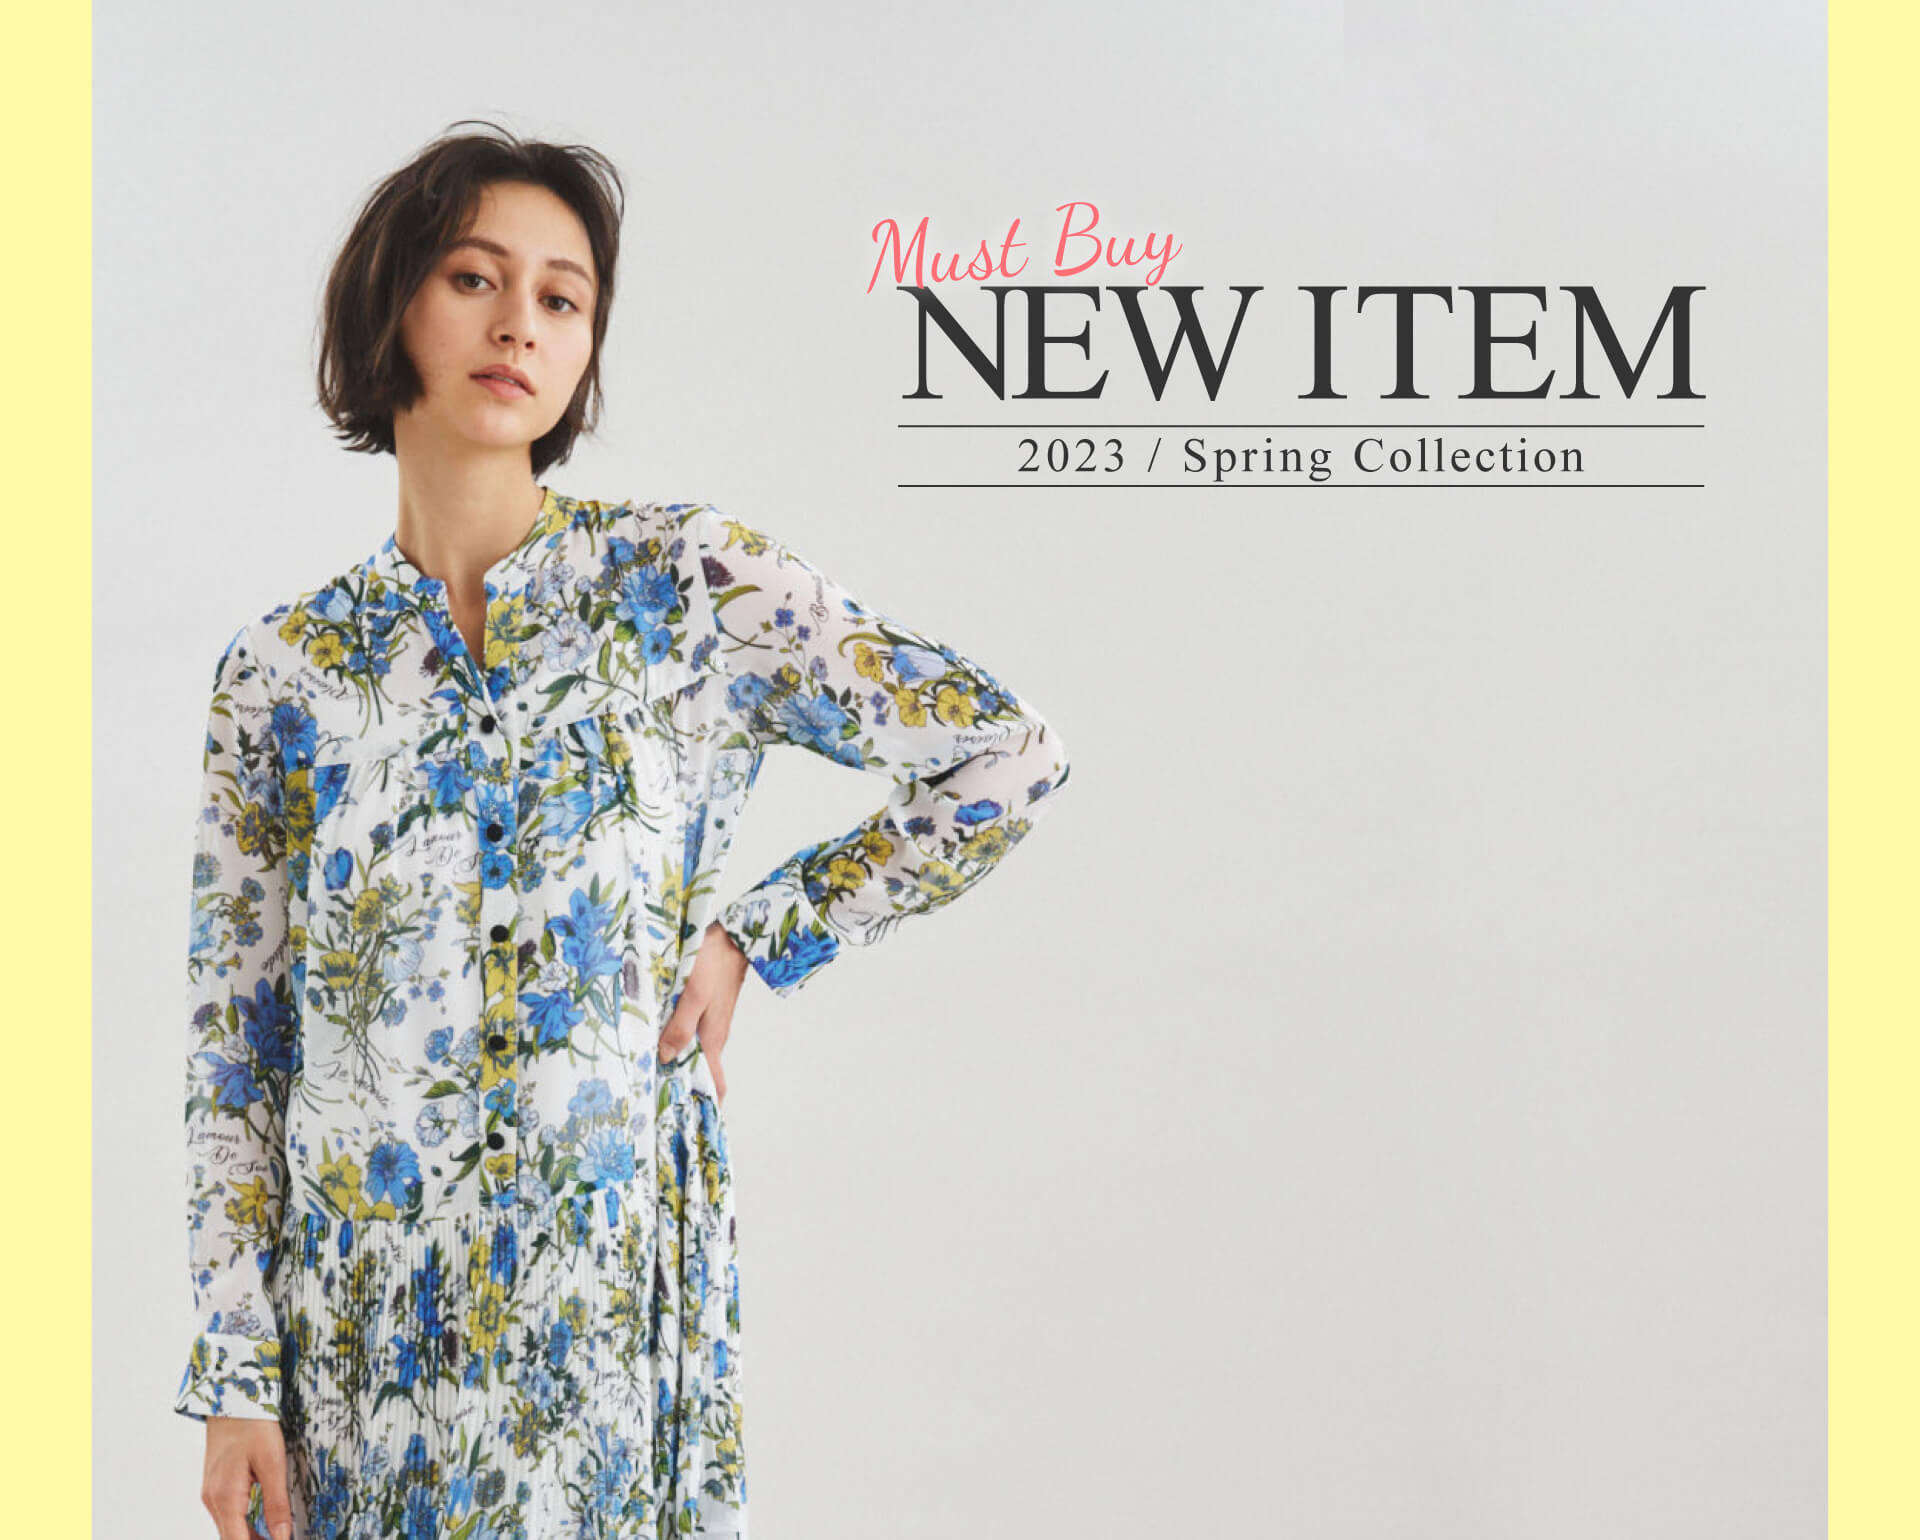 Must Buy NEW ITEM 2023 Spring Collection